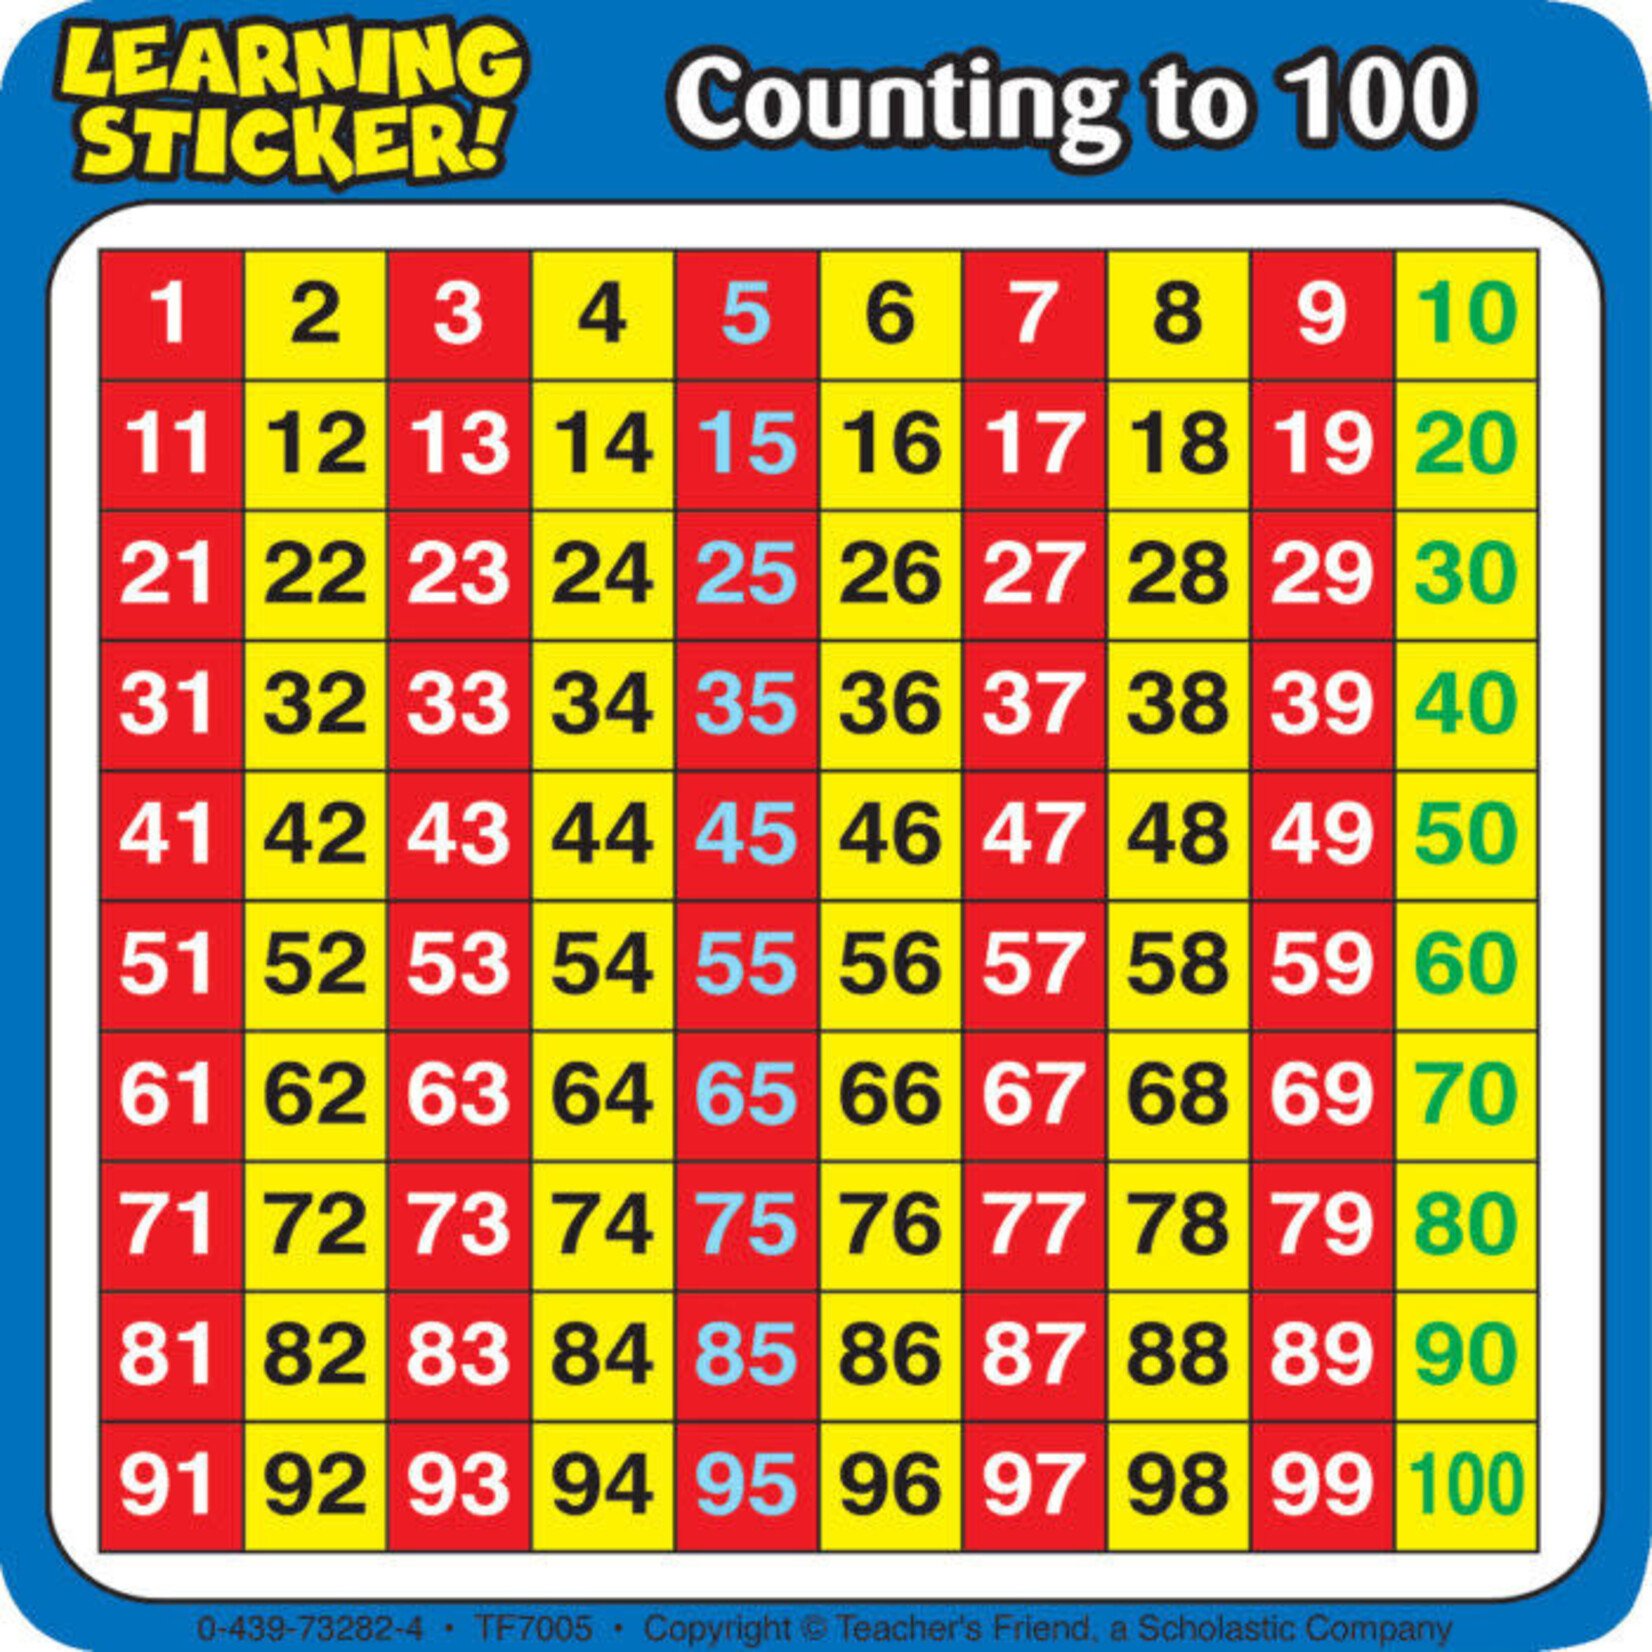 stkr-counting-to-100-educational-outfitters